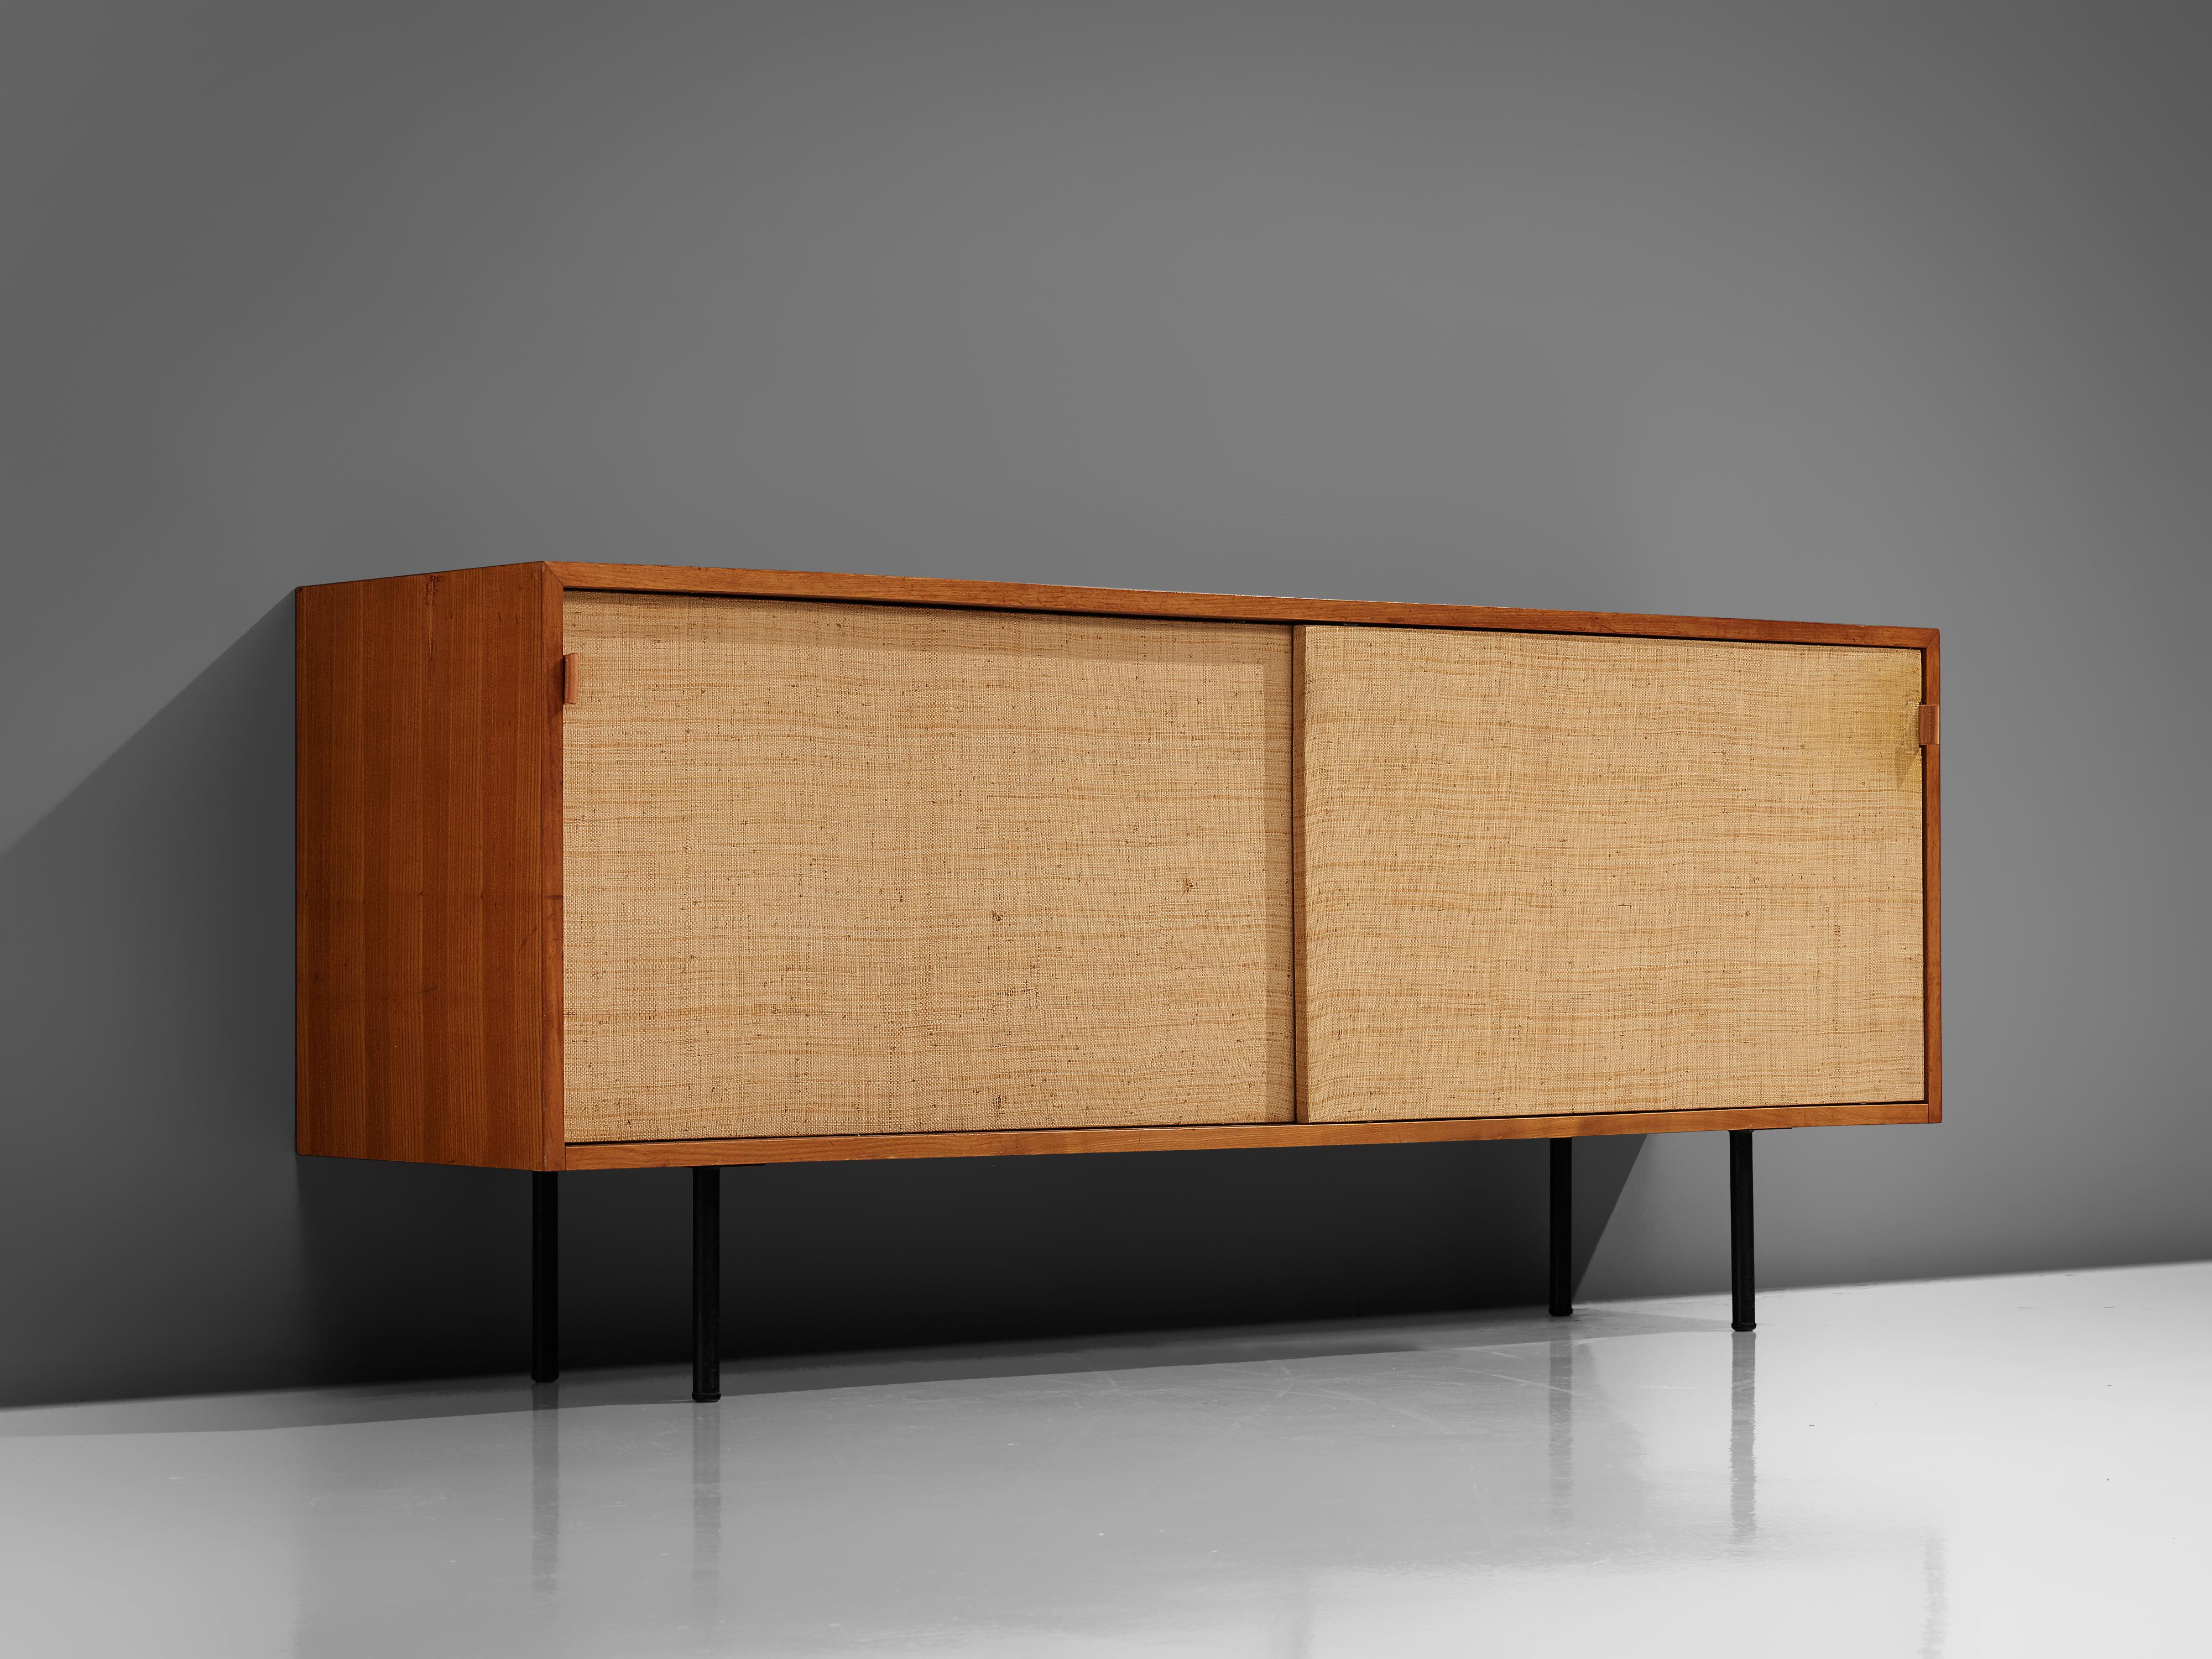 Florence Knoll for Knoll International, sideboard, walnut, seagrass, cane, steel, leather, United States, design 1948

An early office-residential crossover piece. The wooden sideboard has two sliding doors which are covered with cane and feature